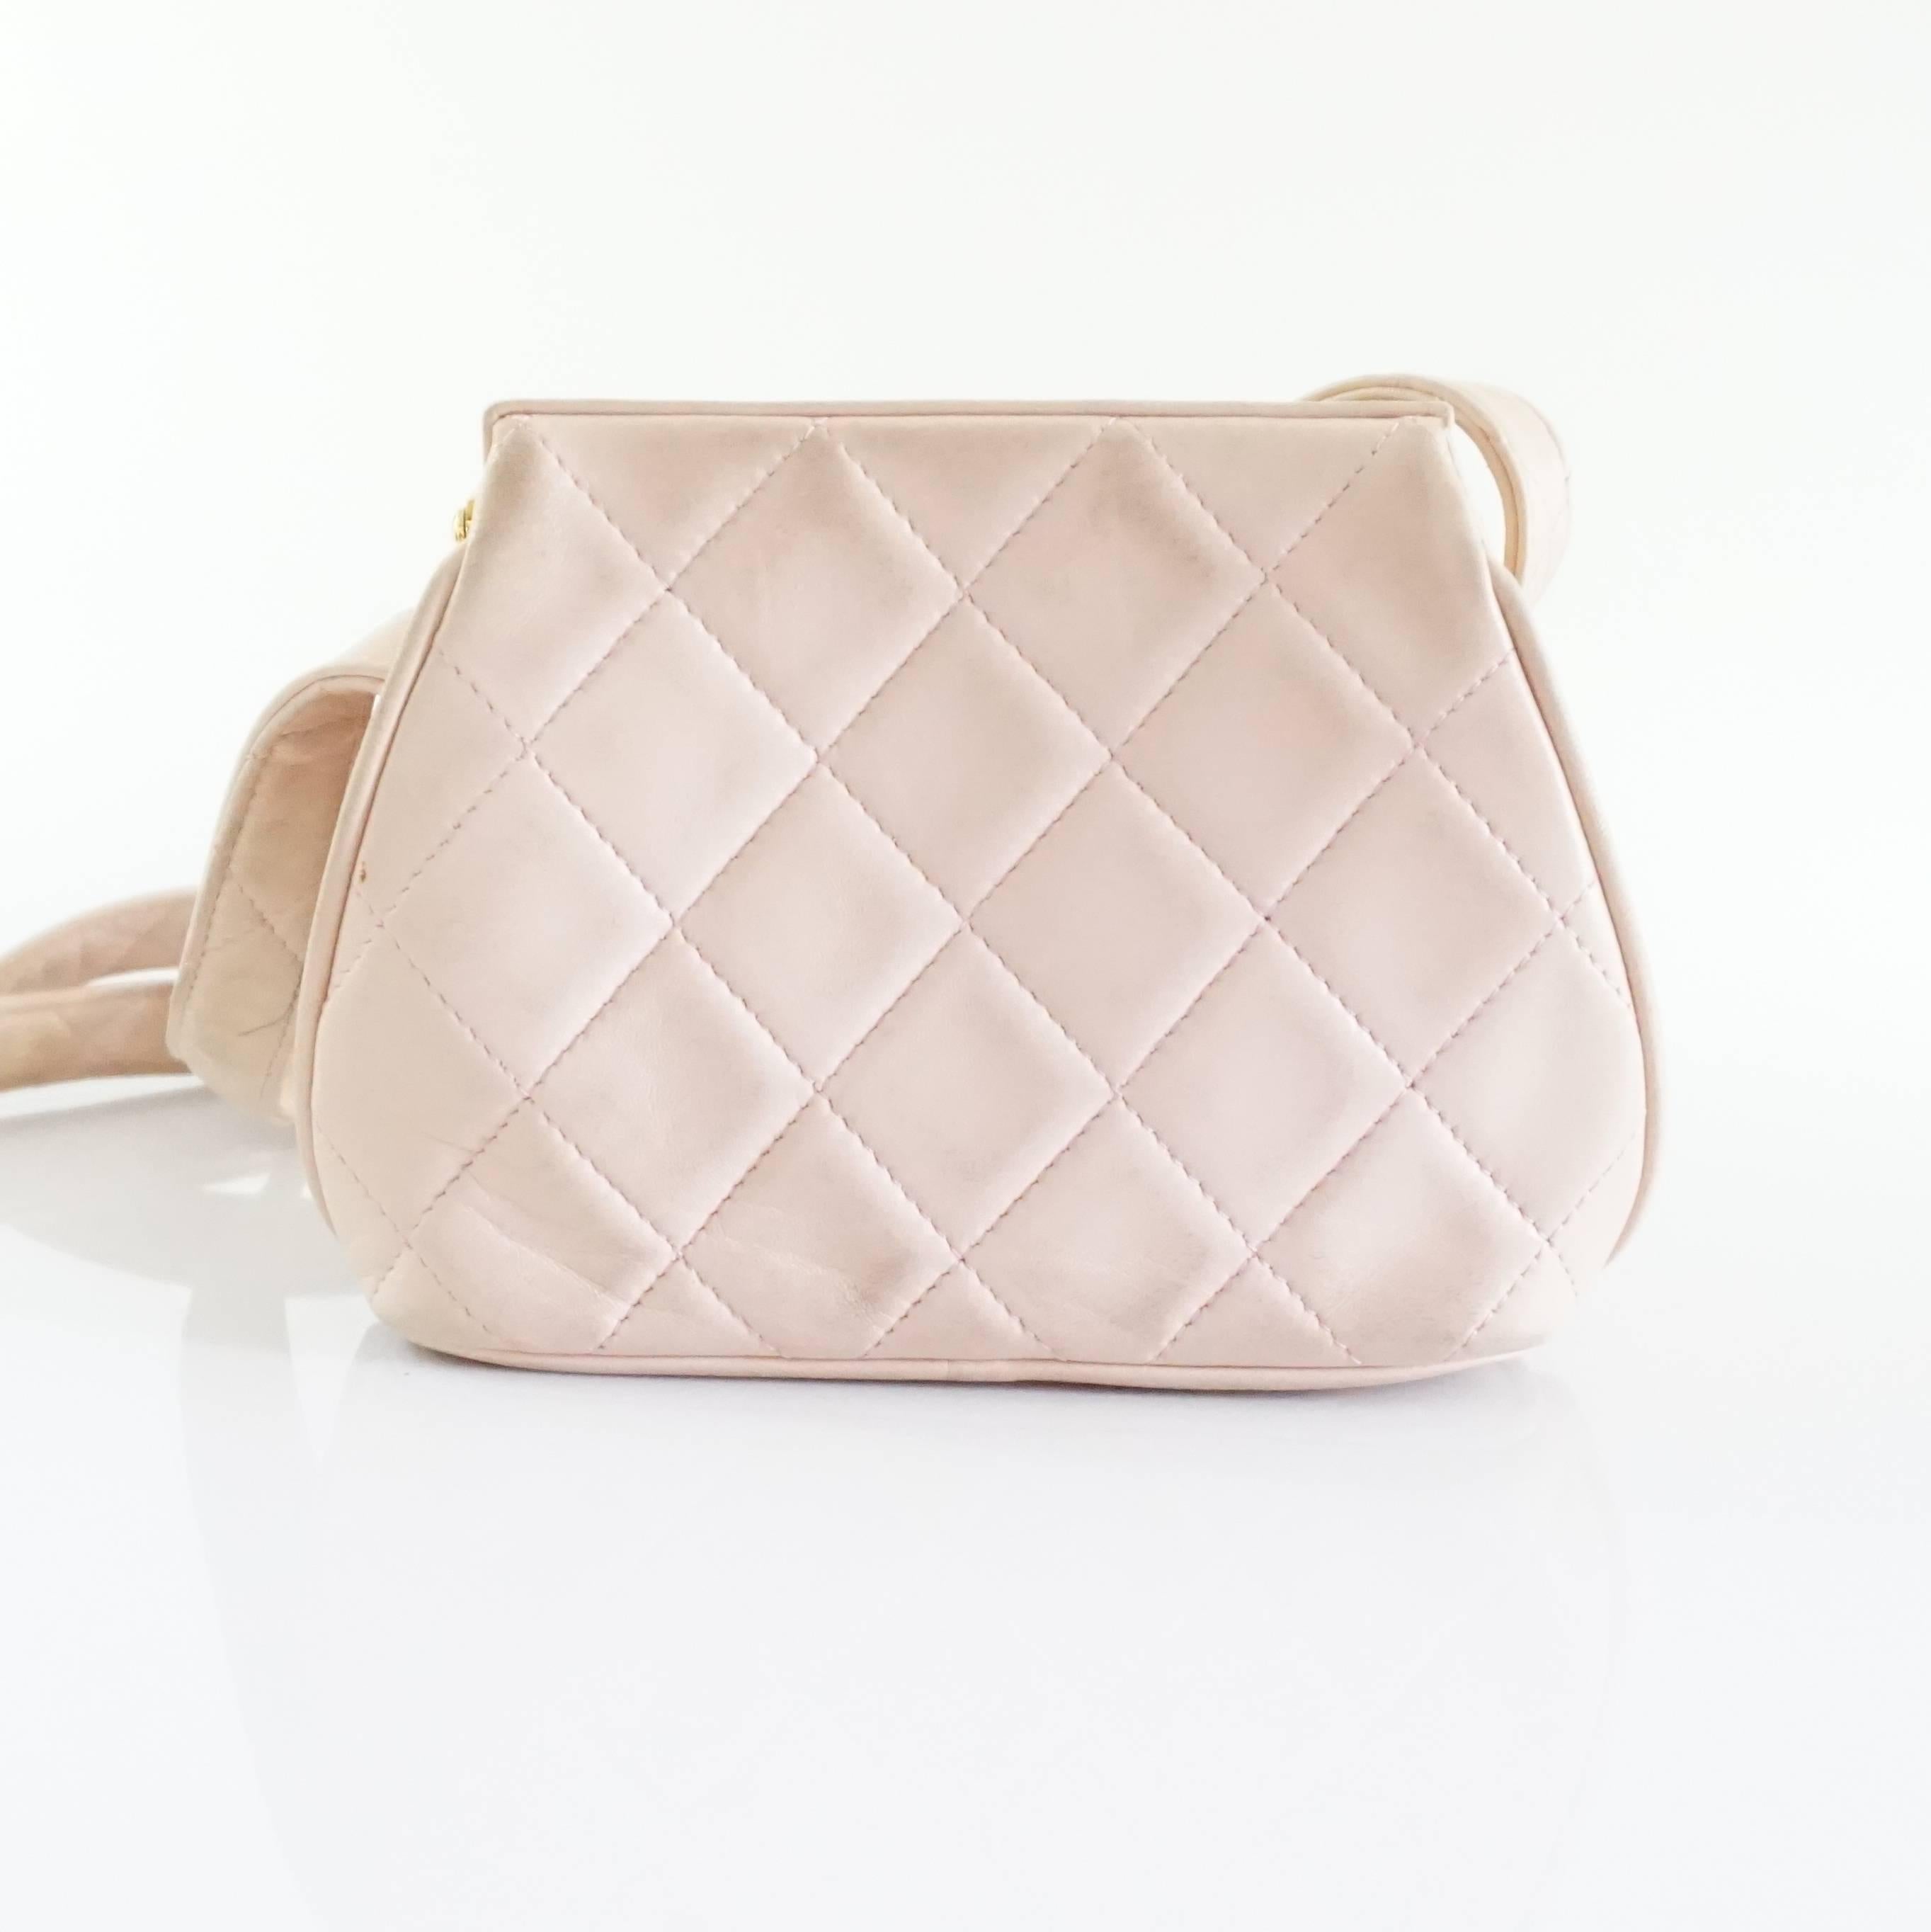 Beige Chanel Pink Leather Frame Crossbody Bag - circa late 80's